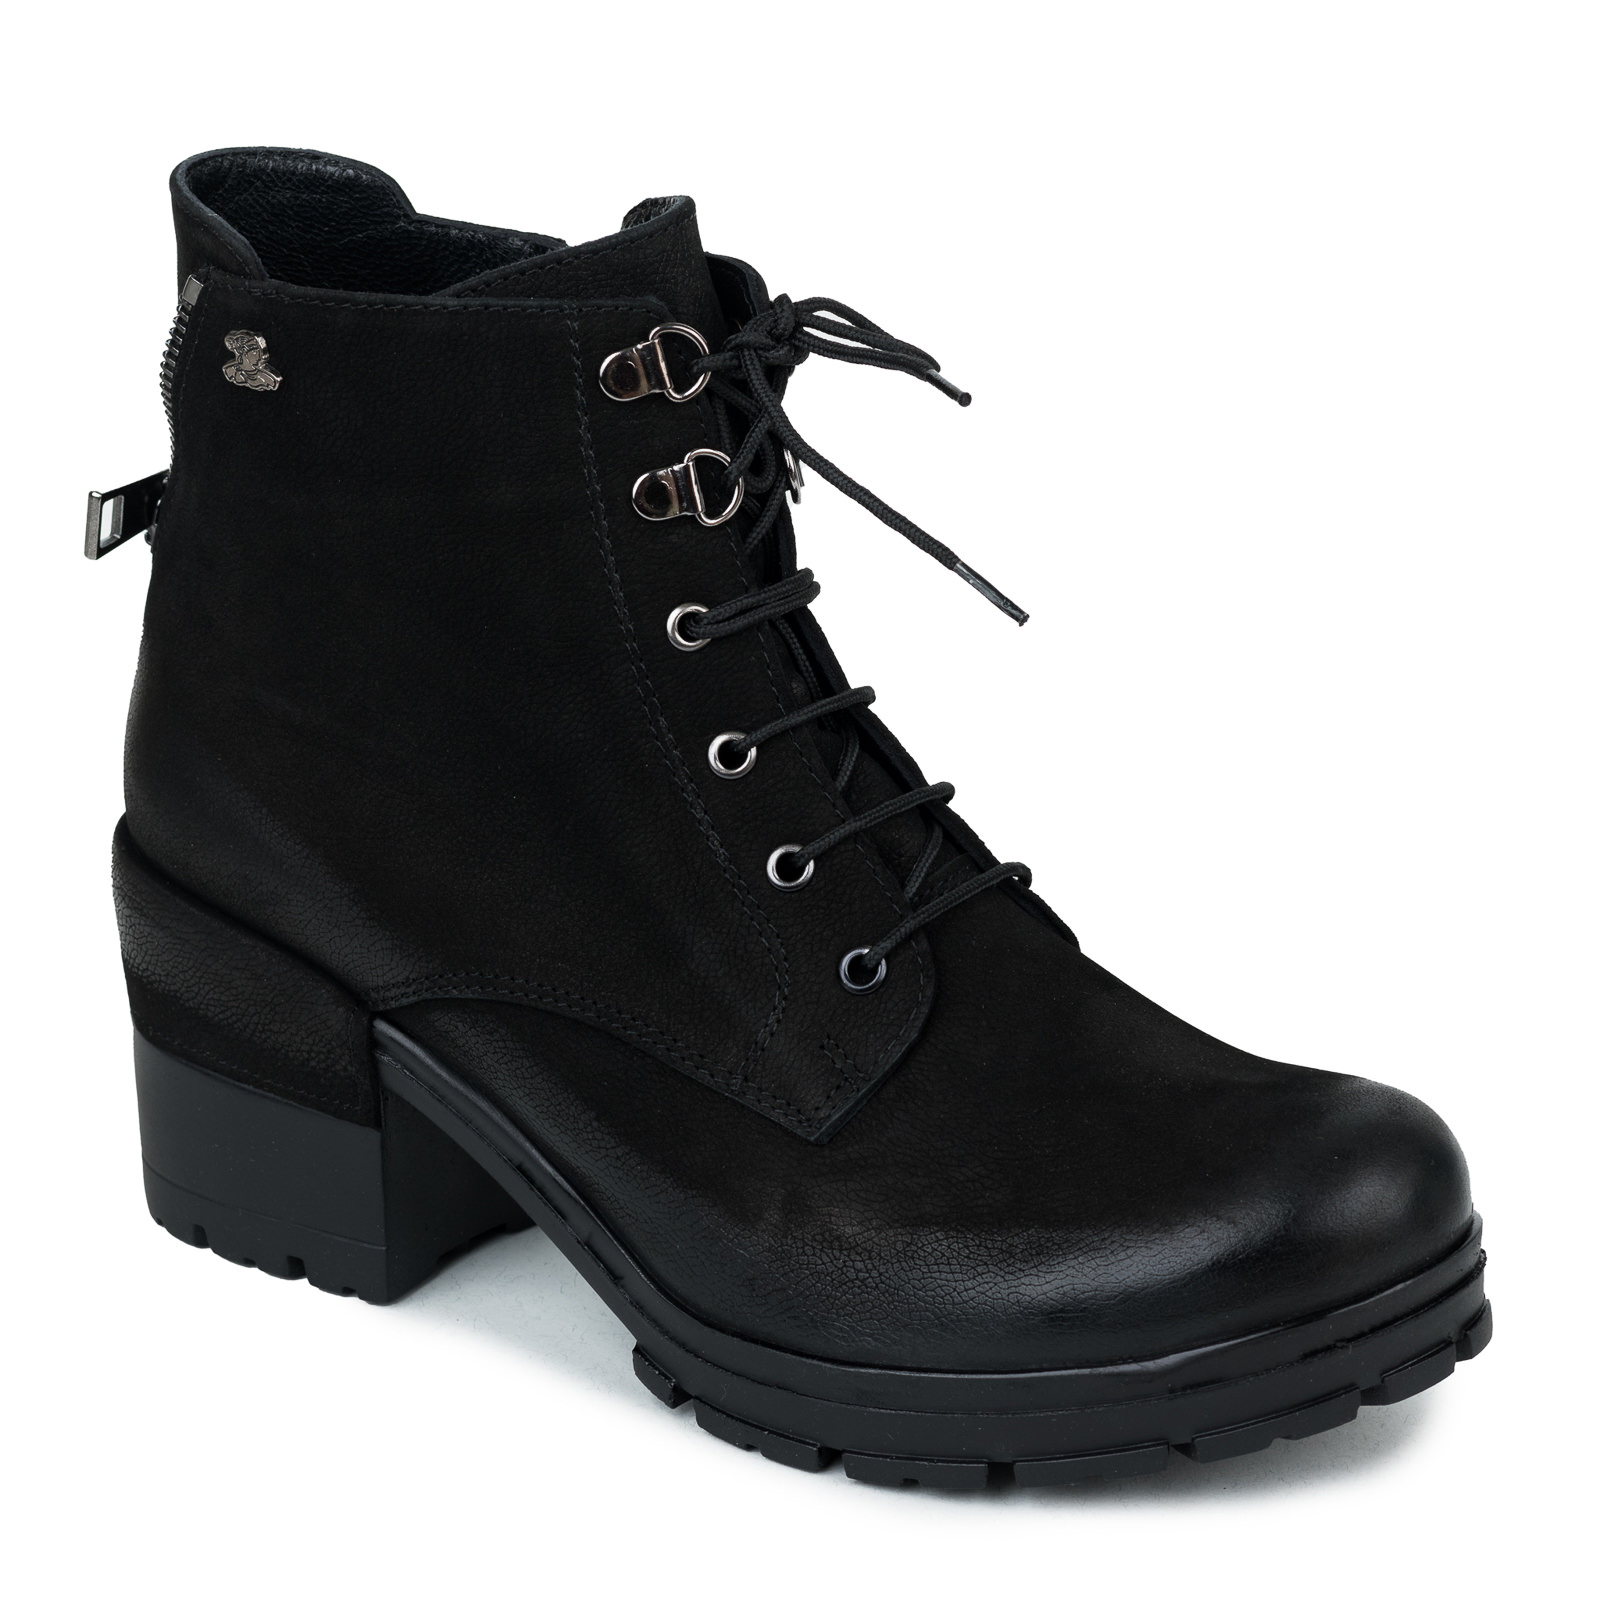 Leather ankle boots B431 - BLACK